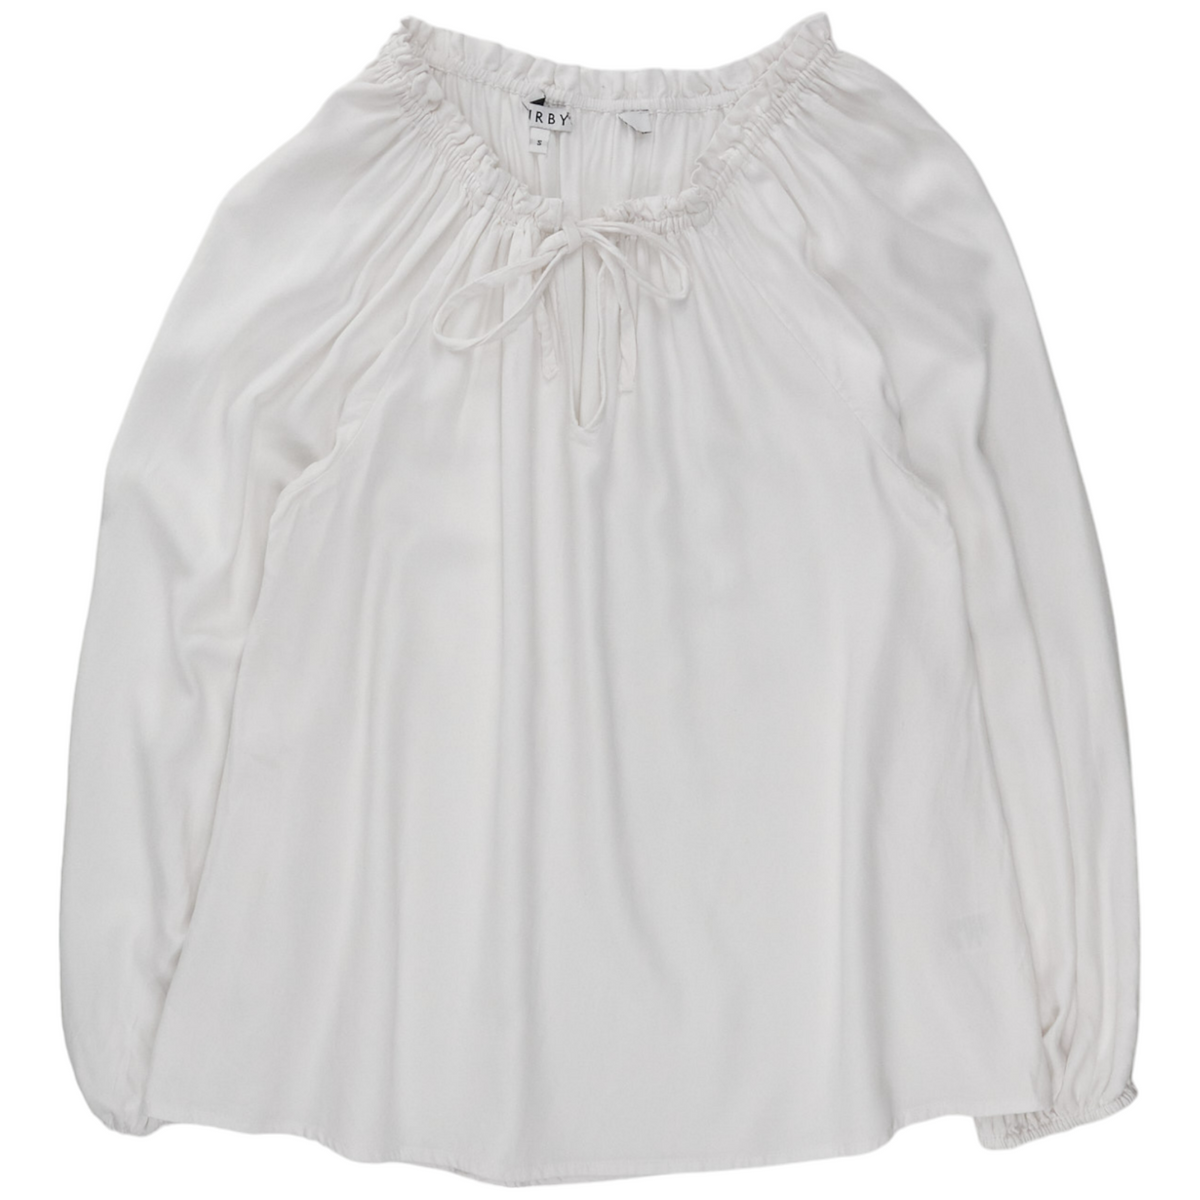 NRBY White Gathered Neck Blouse